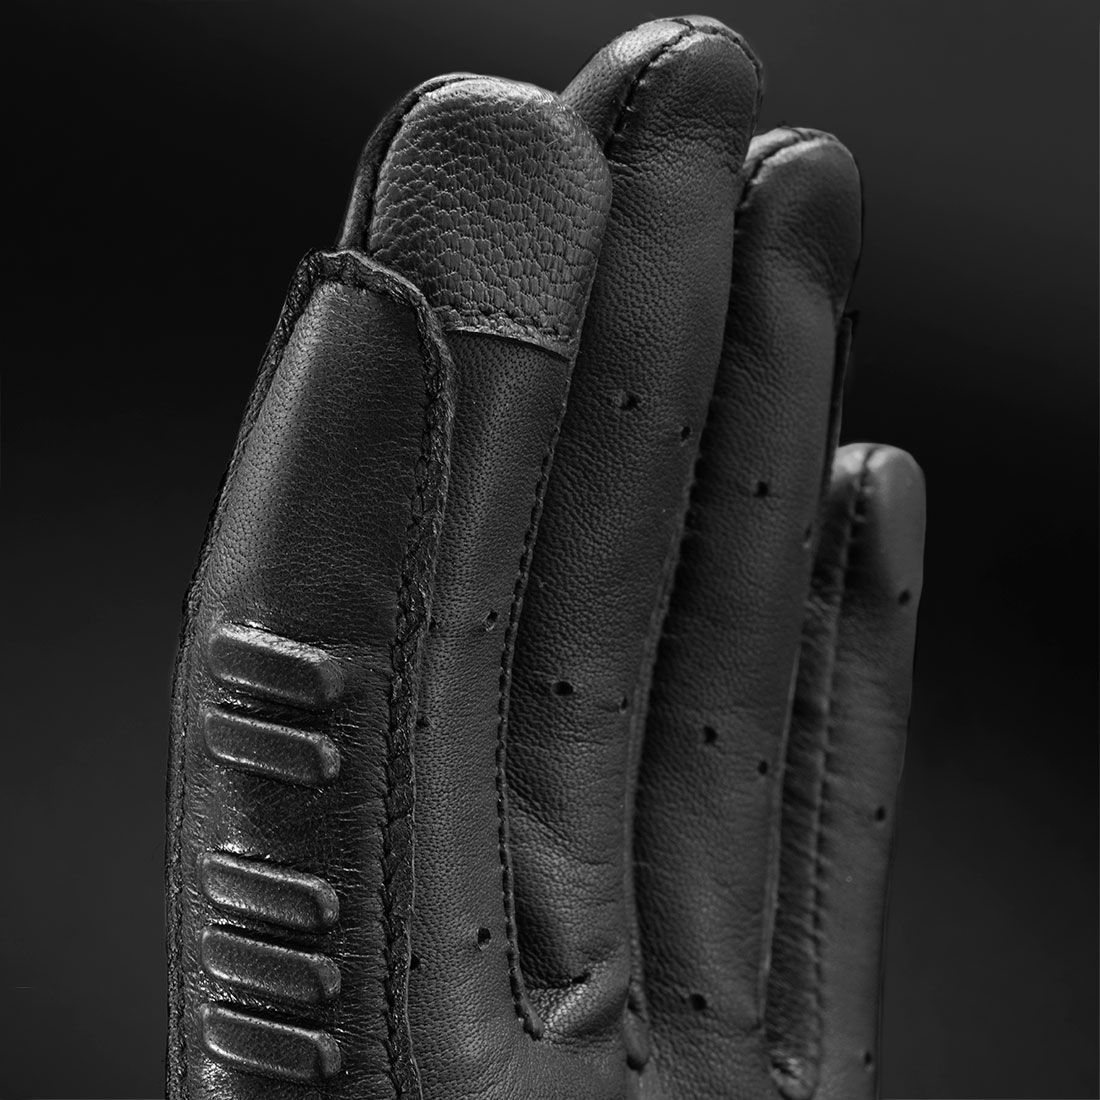 TRADITION - Racer riding gloves